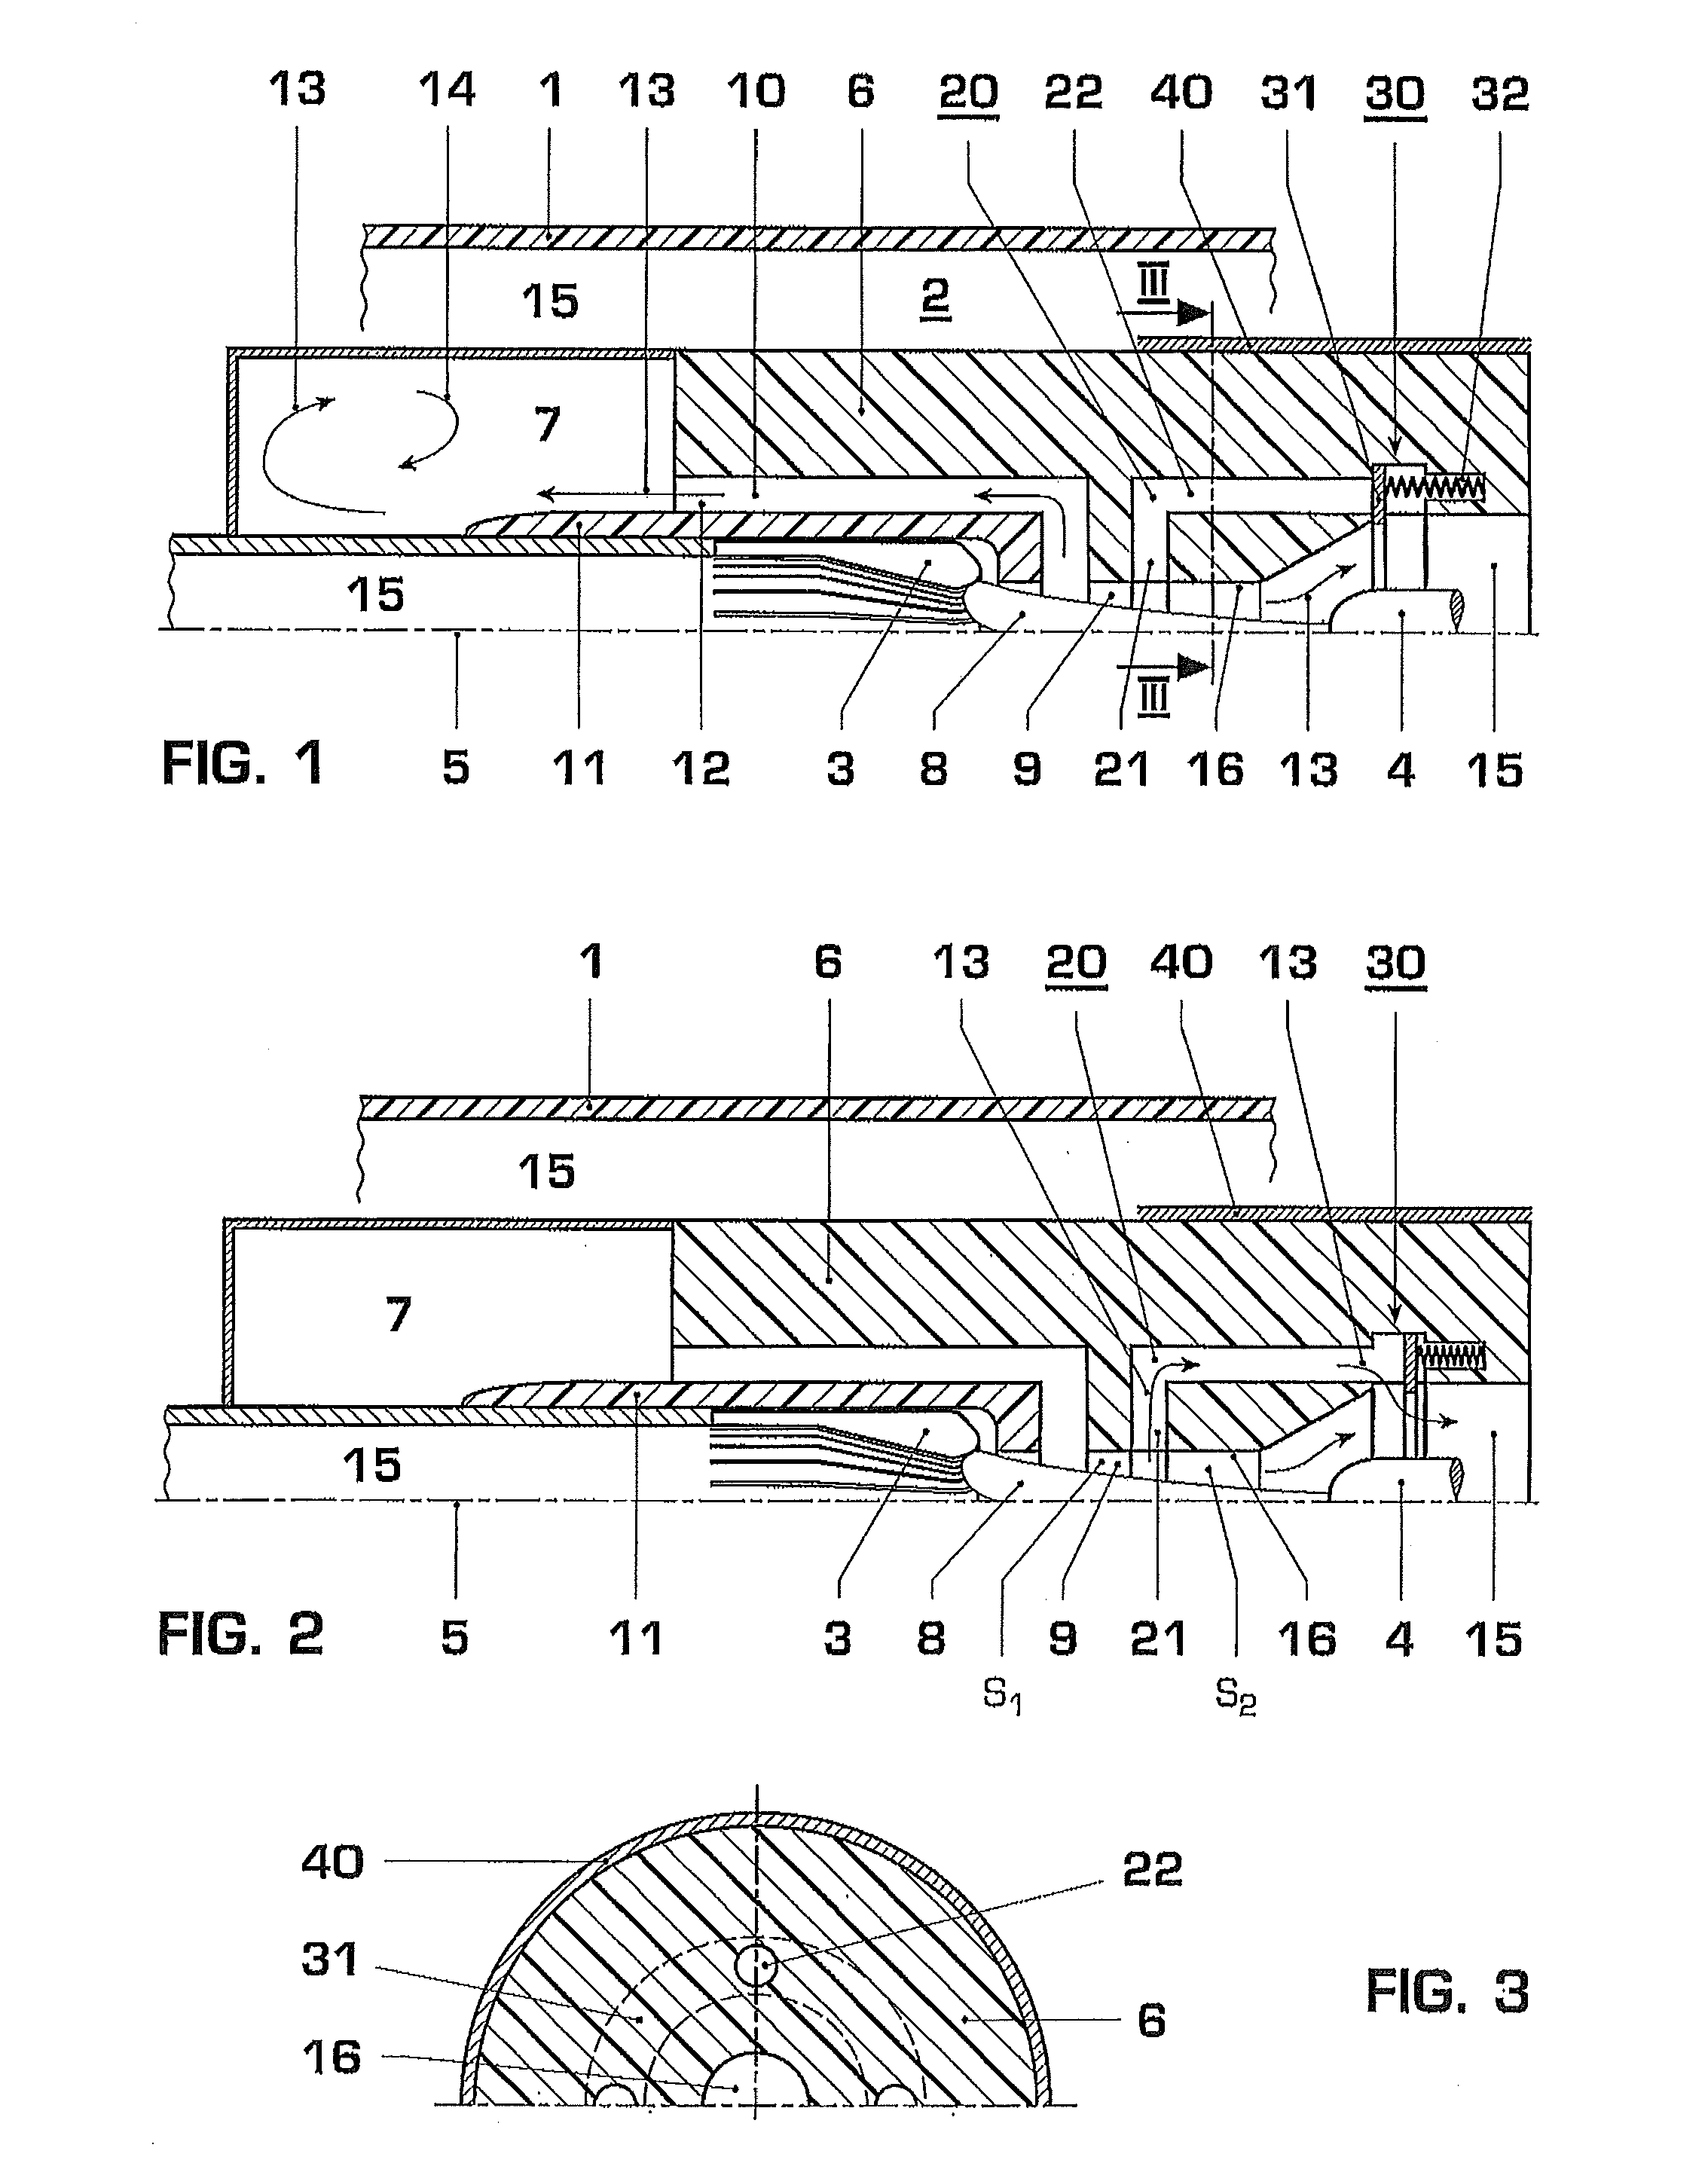 Gas-insulated high-voltage circuit breaker with a relief duct which is controlled by an overflow valve